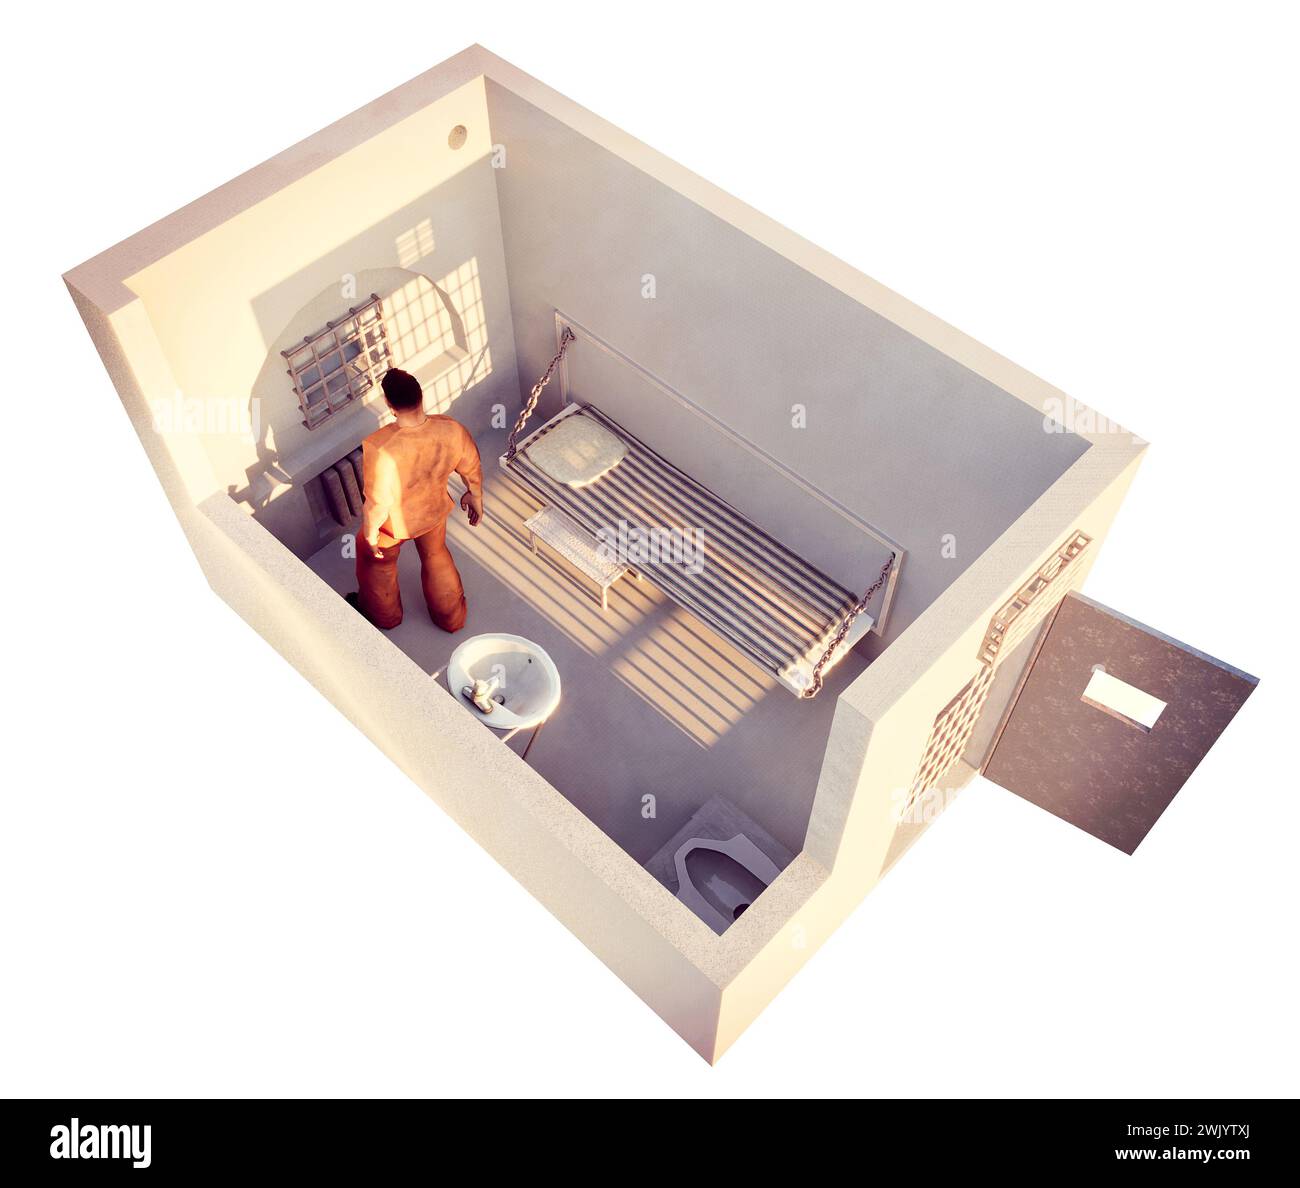 Prison, cell of a North Siberian penitentiary, Kharp prison. Detained inside the cell. Penal colony. 3d rendering Stock Photo